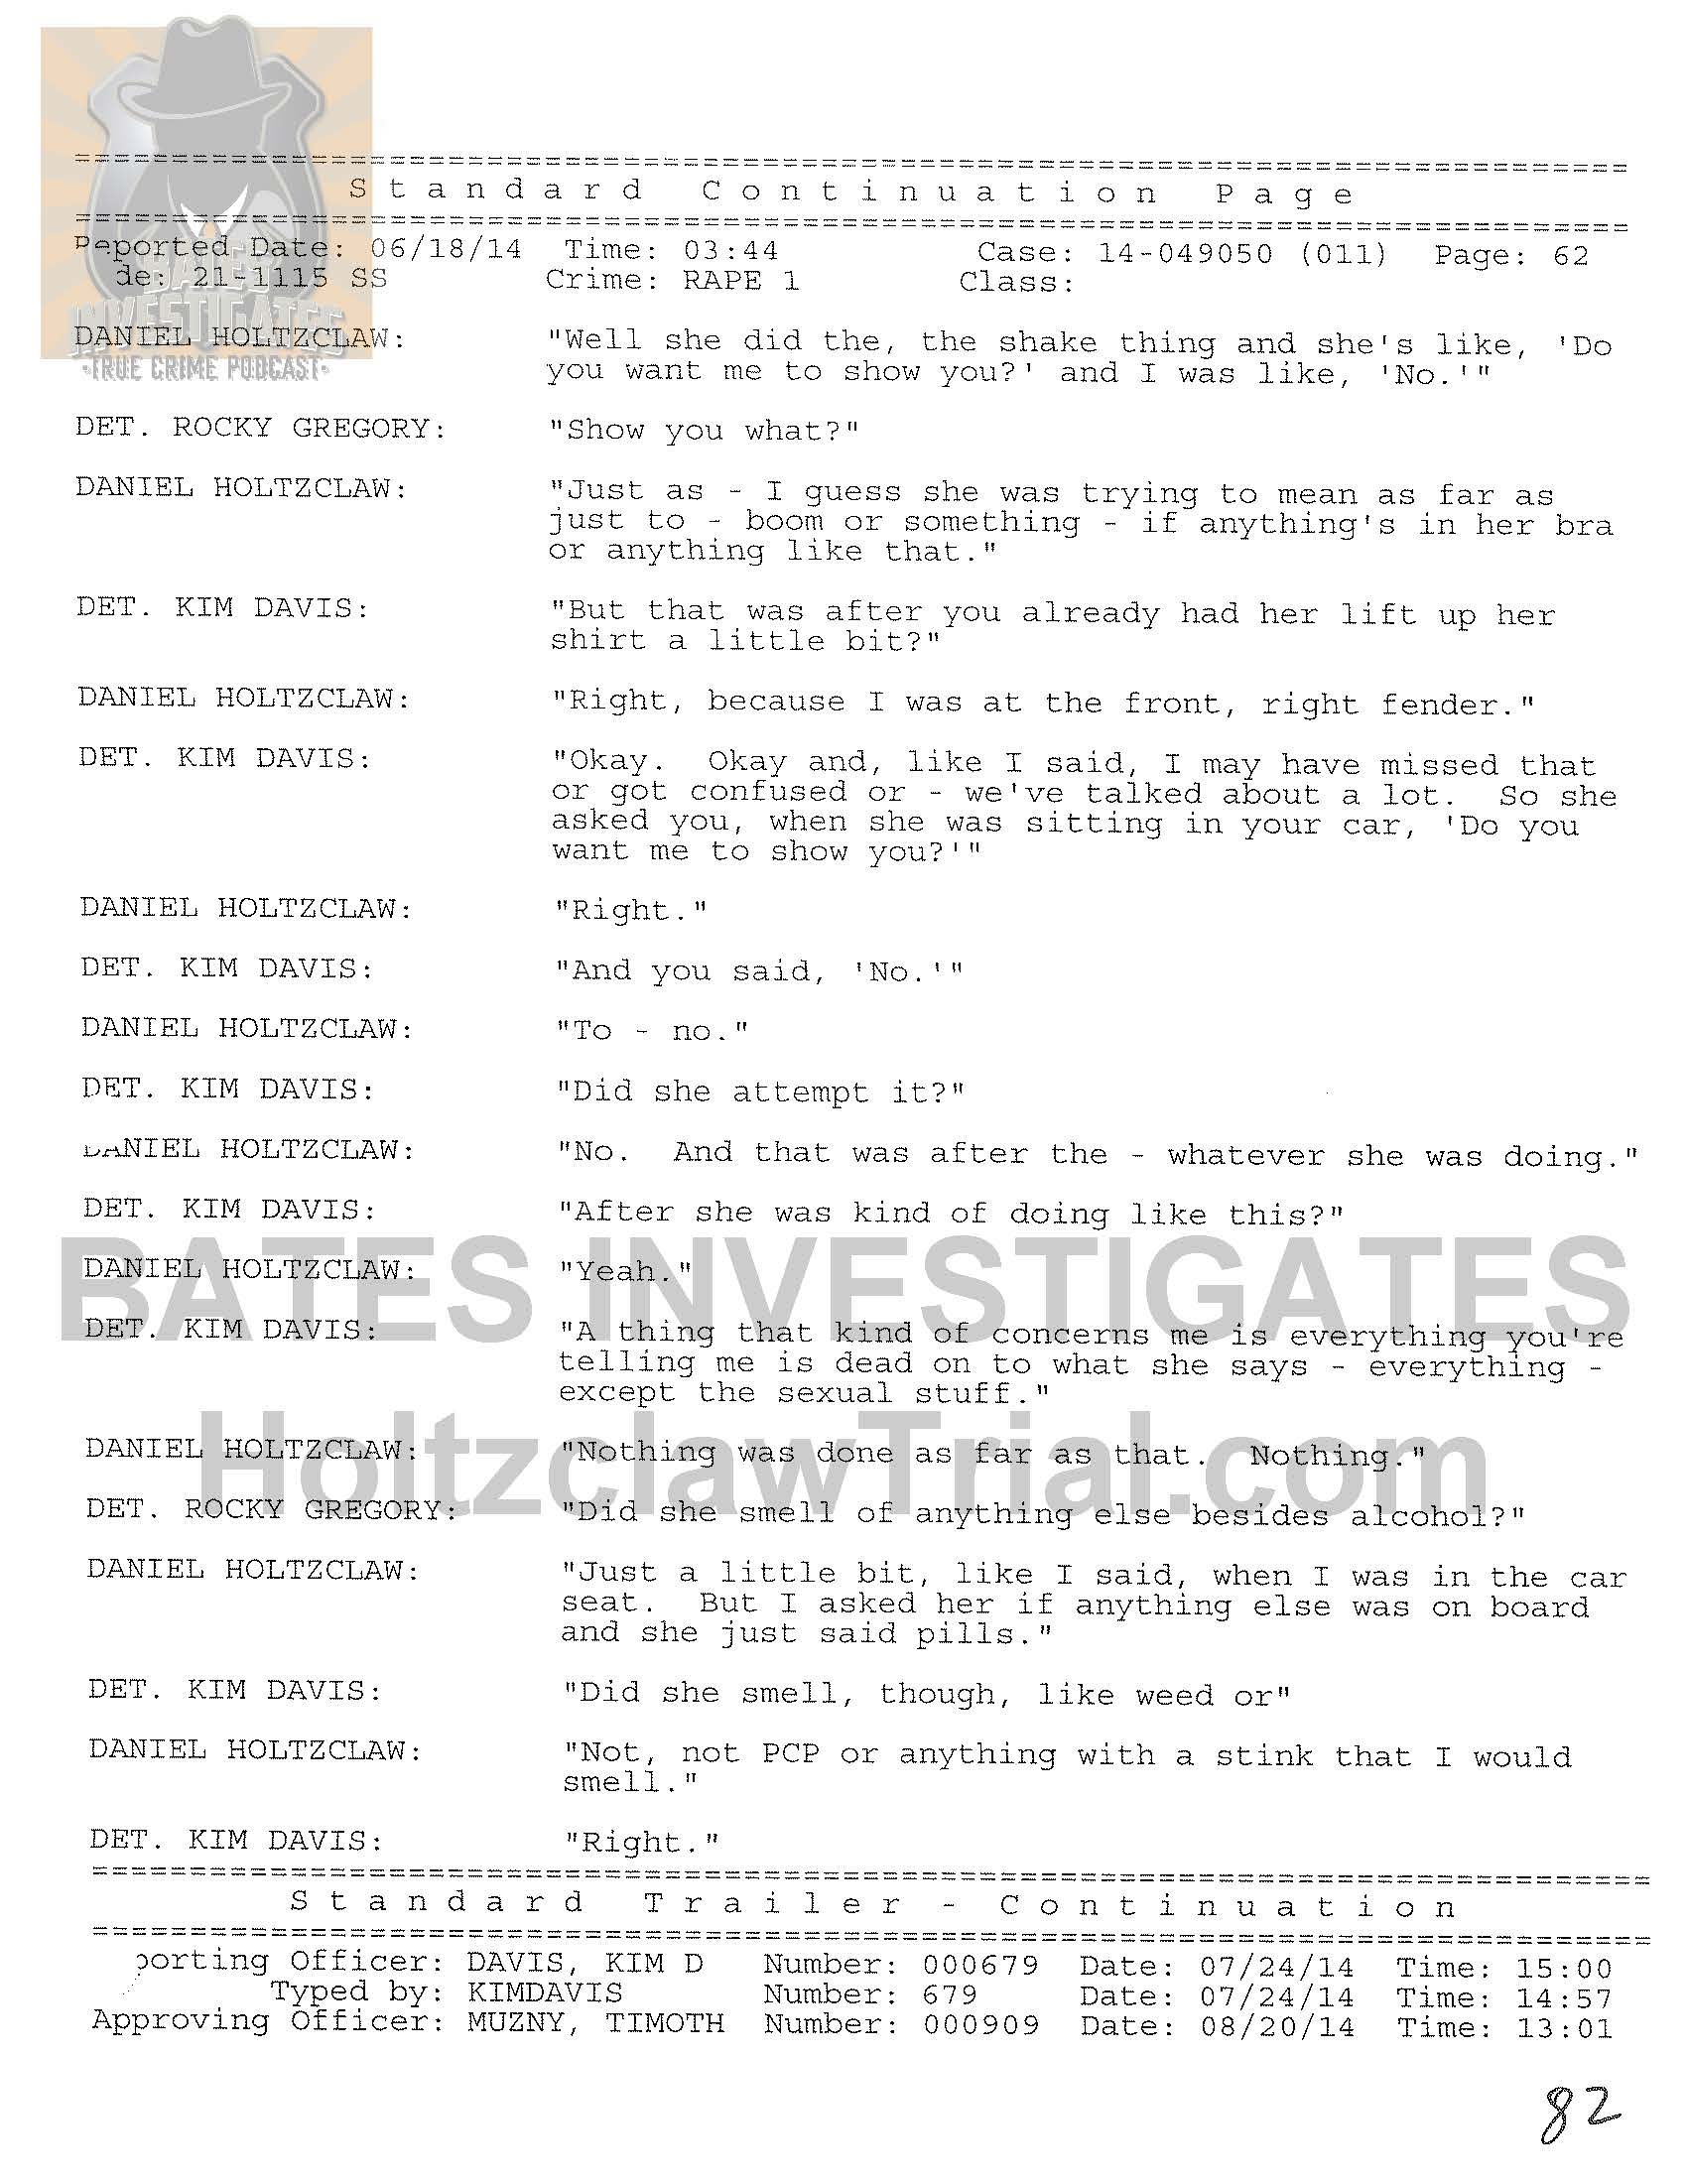 Holtzclaw Interrogation Transcript - Ep02 Redacted_Page_62.jpg